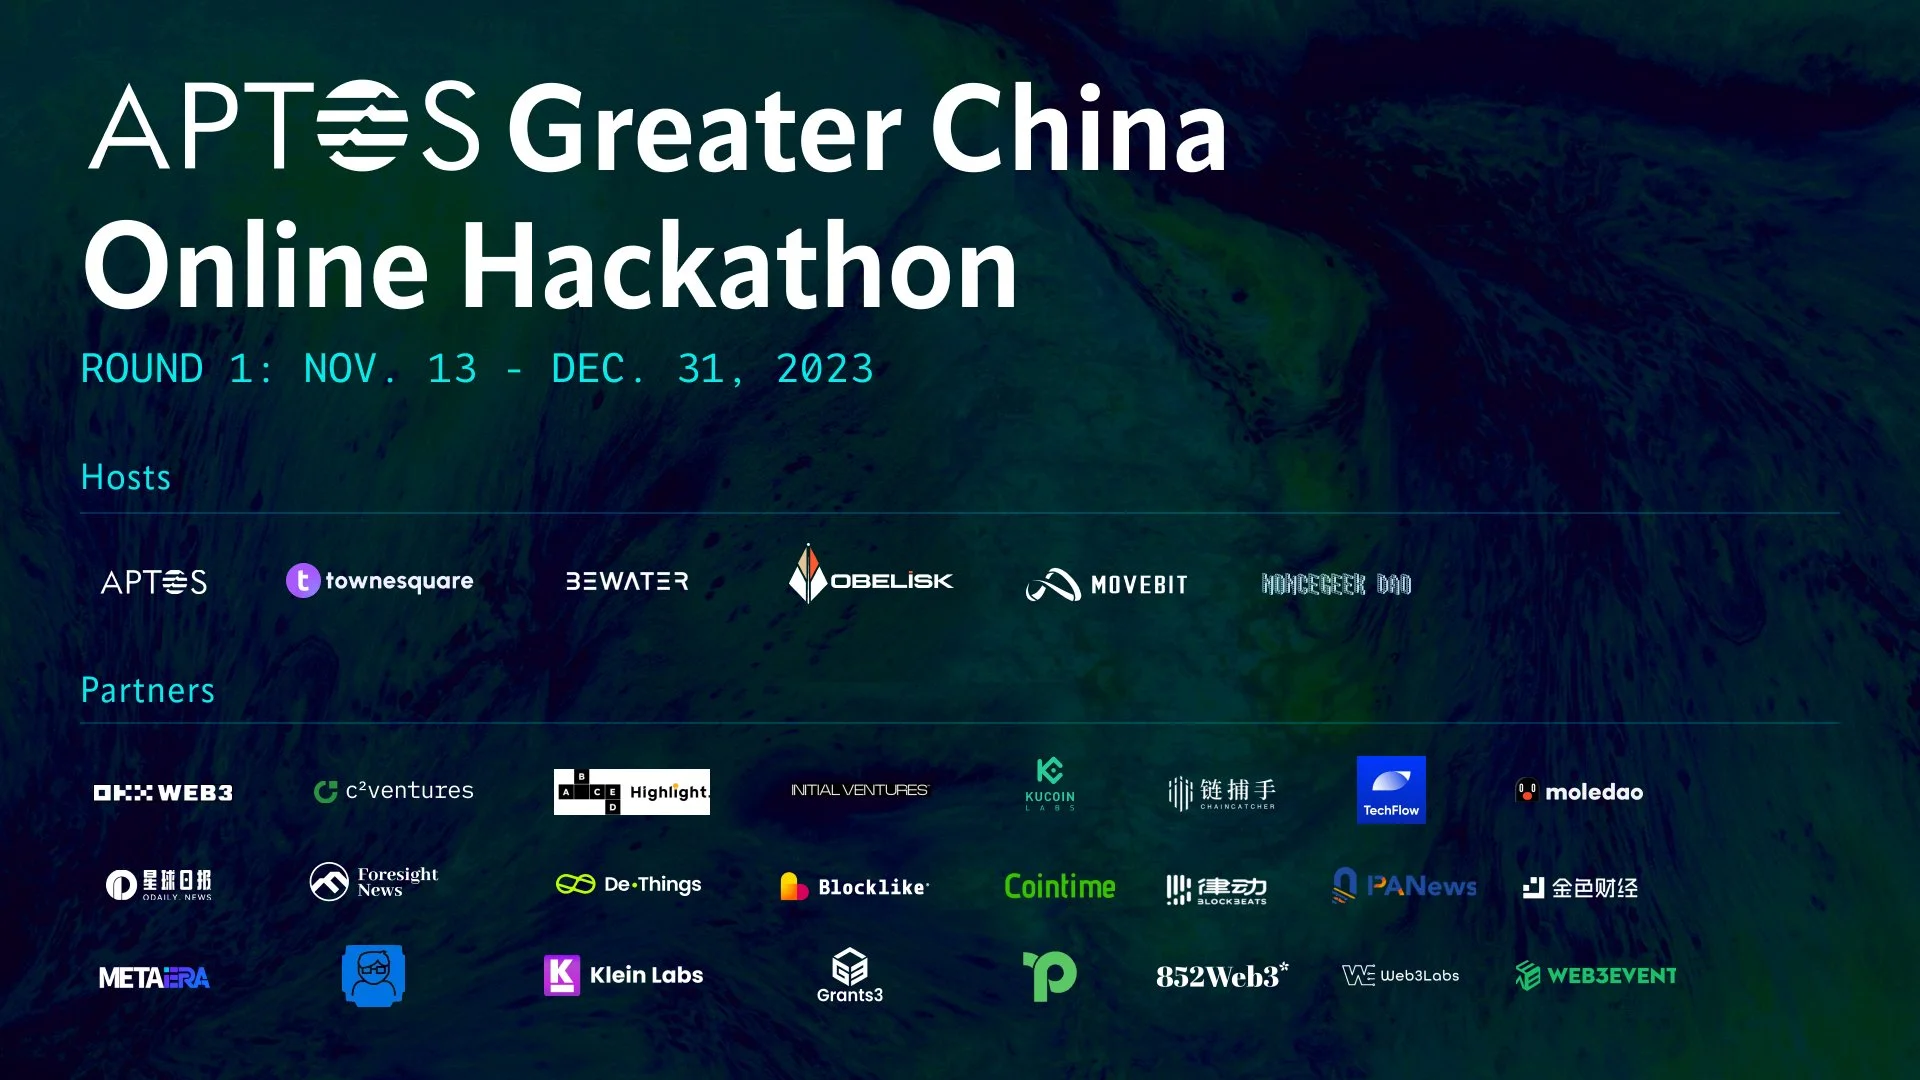 Registration for Aptos Greater China's first online hackathon is now open!